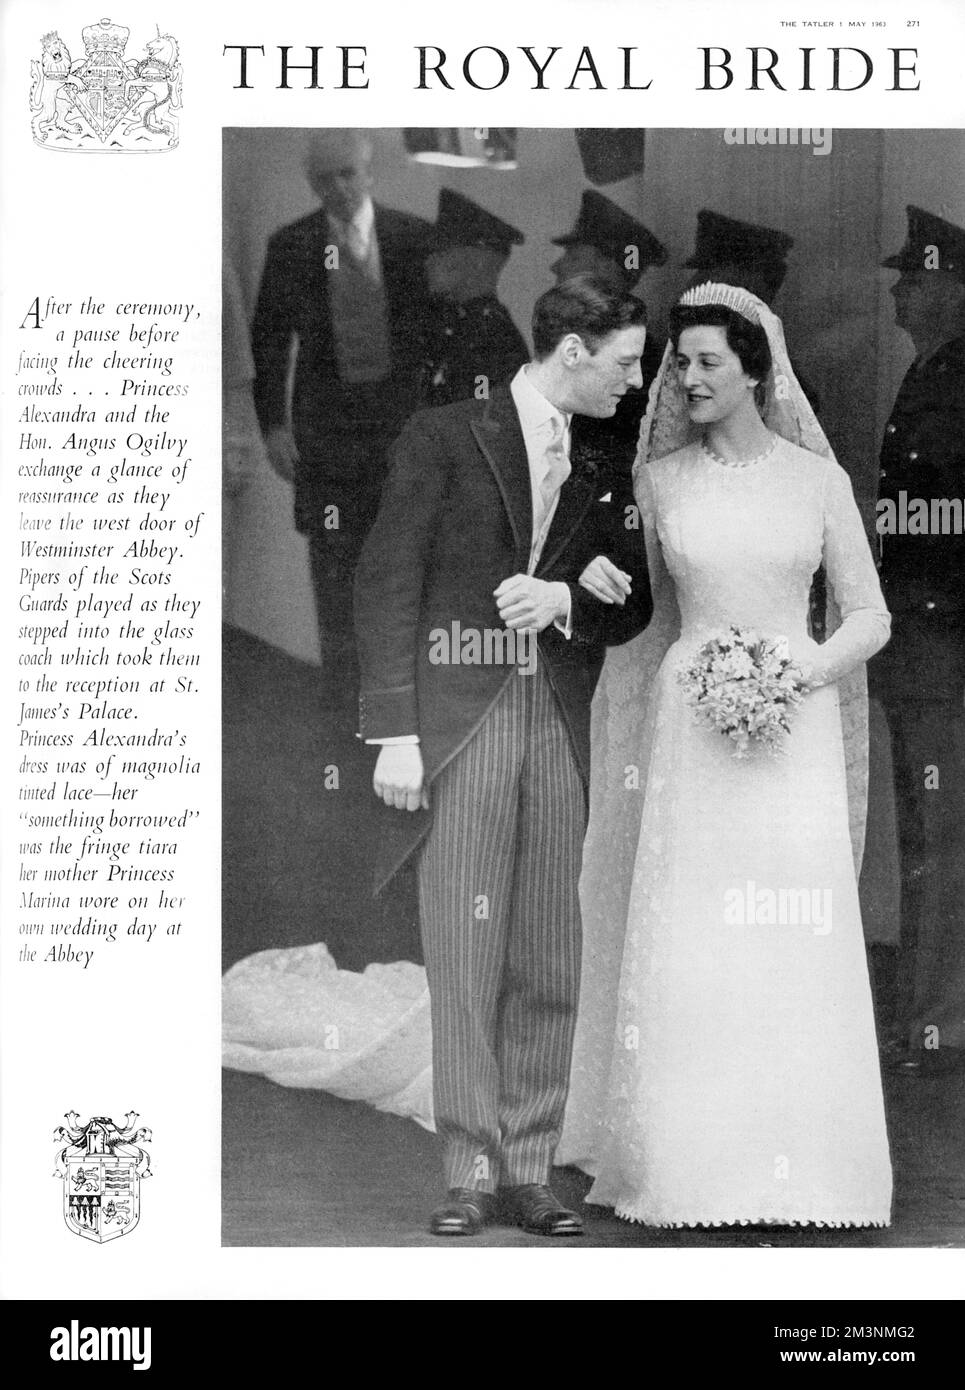 Princess Alexandra of Kent appearing at the doorway of Westminster Abbey with her husband Angus Ogilvy following their marriage there on 24 April 1963.  The bride wore a dress of magnolia tinted lace by John  Kavanagh and the diamond 'fringe' tiara worn by her mother, Princess Marina on her own wedding day at the Abbey in 1934.     Date: 1963 Stock Photo